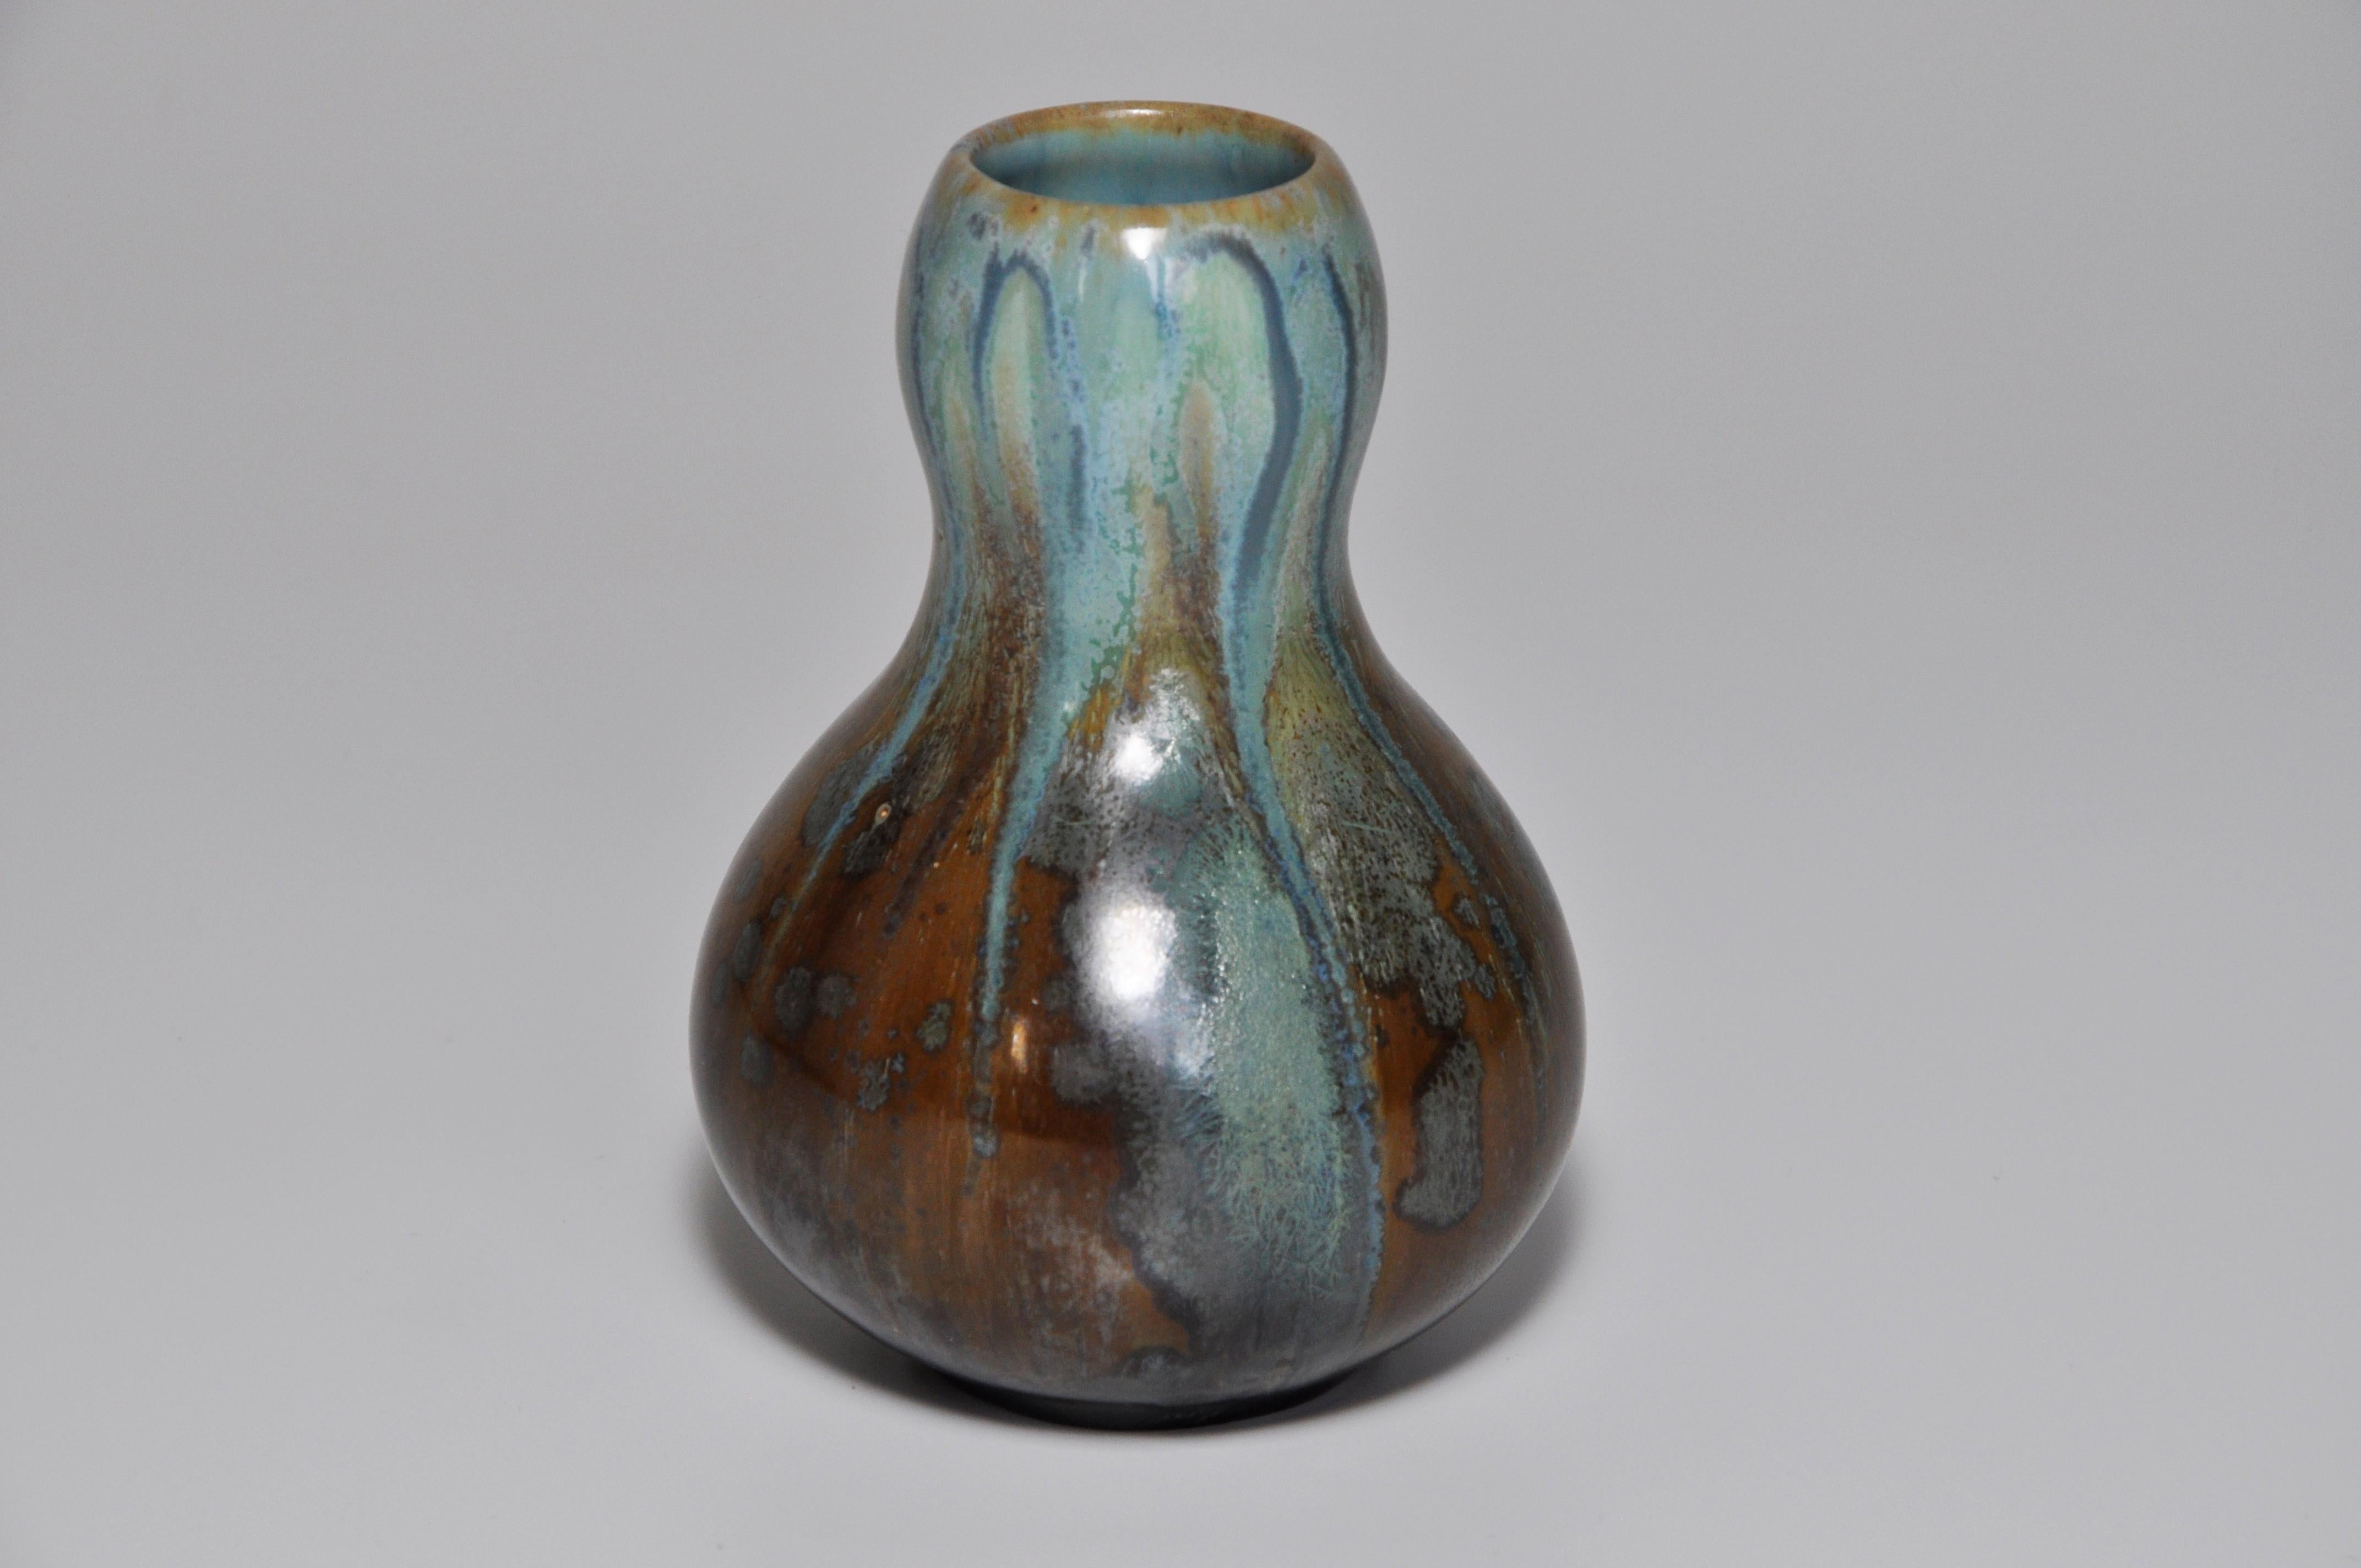 French Art Nouveau Pottery Blue Green Crystalline Glaze Pot Vase Pierrefonds In Excellent Condition For Sale In Belfast, Northern Ireland